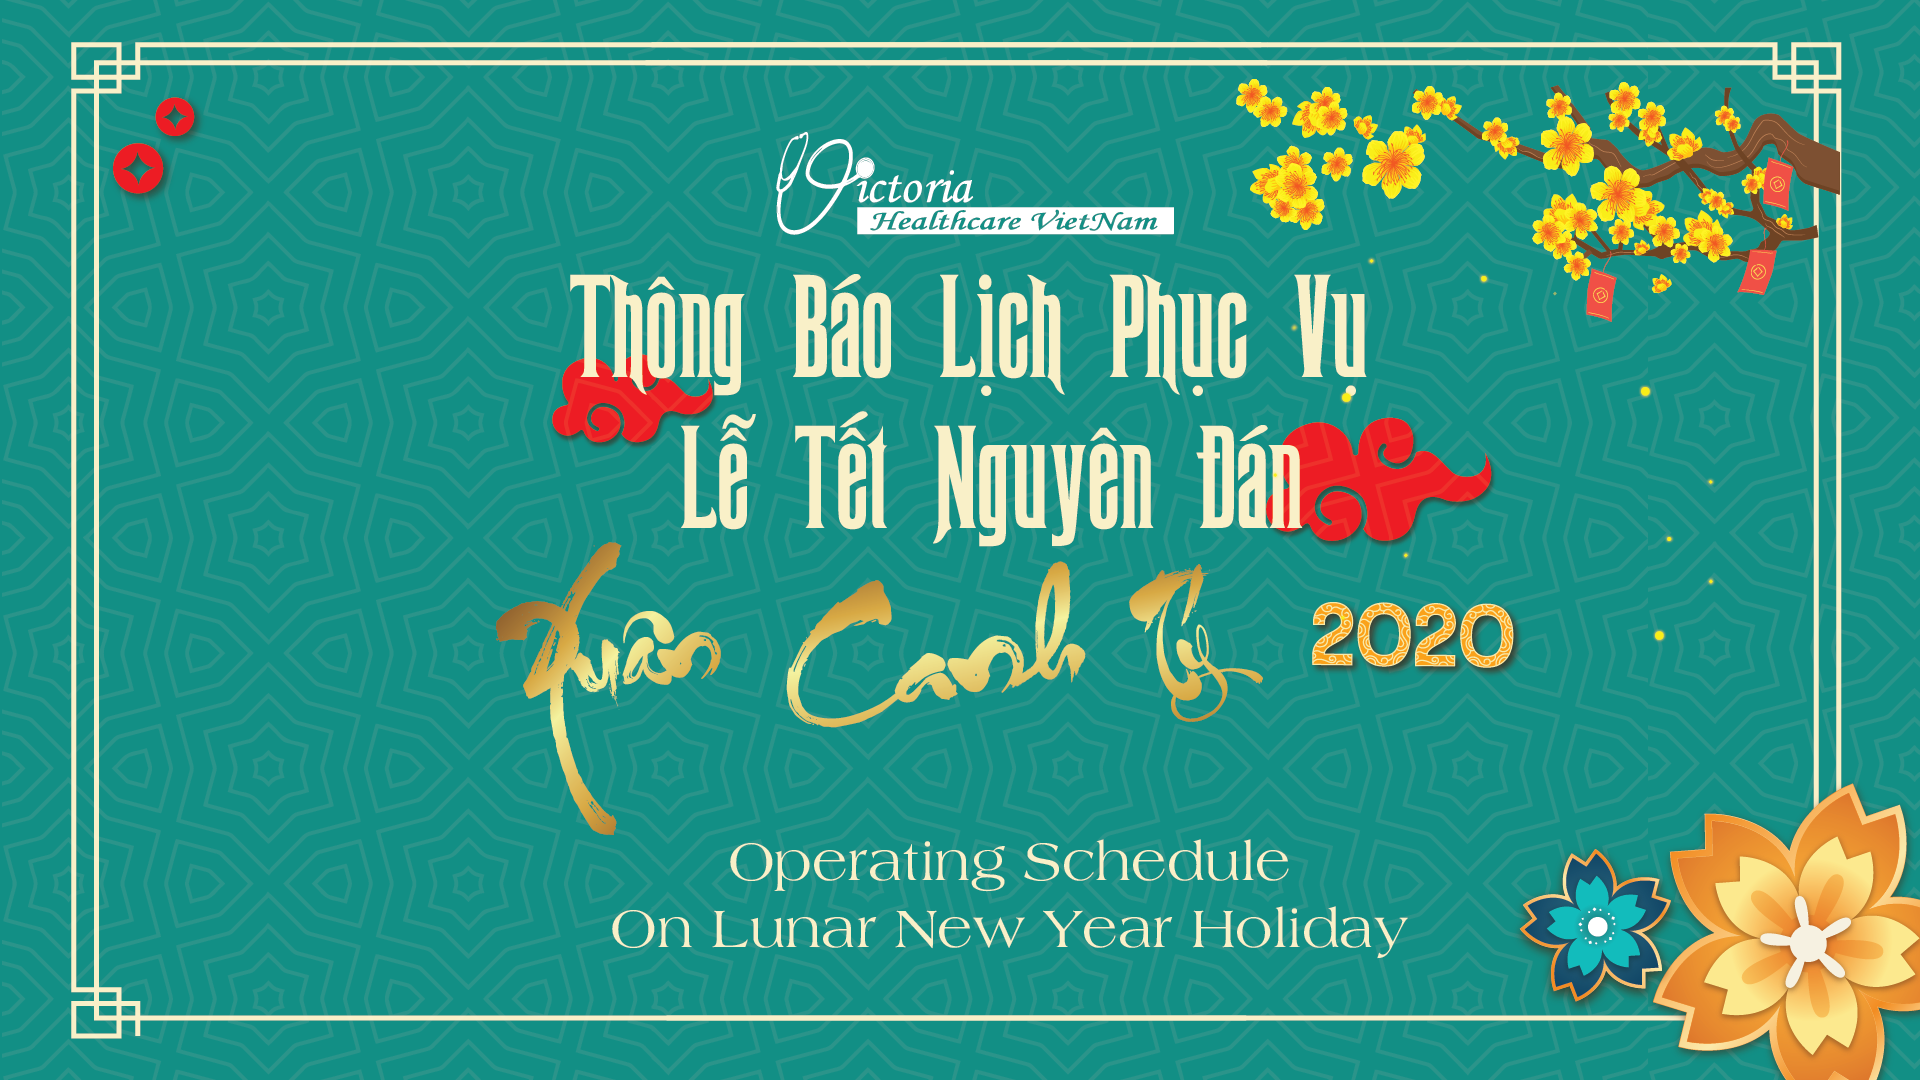 Operating Schedules & Service Charge On Lunar New Year 2020